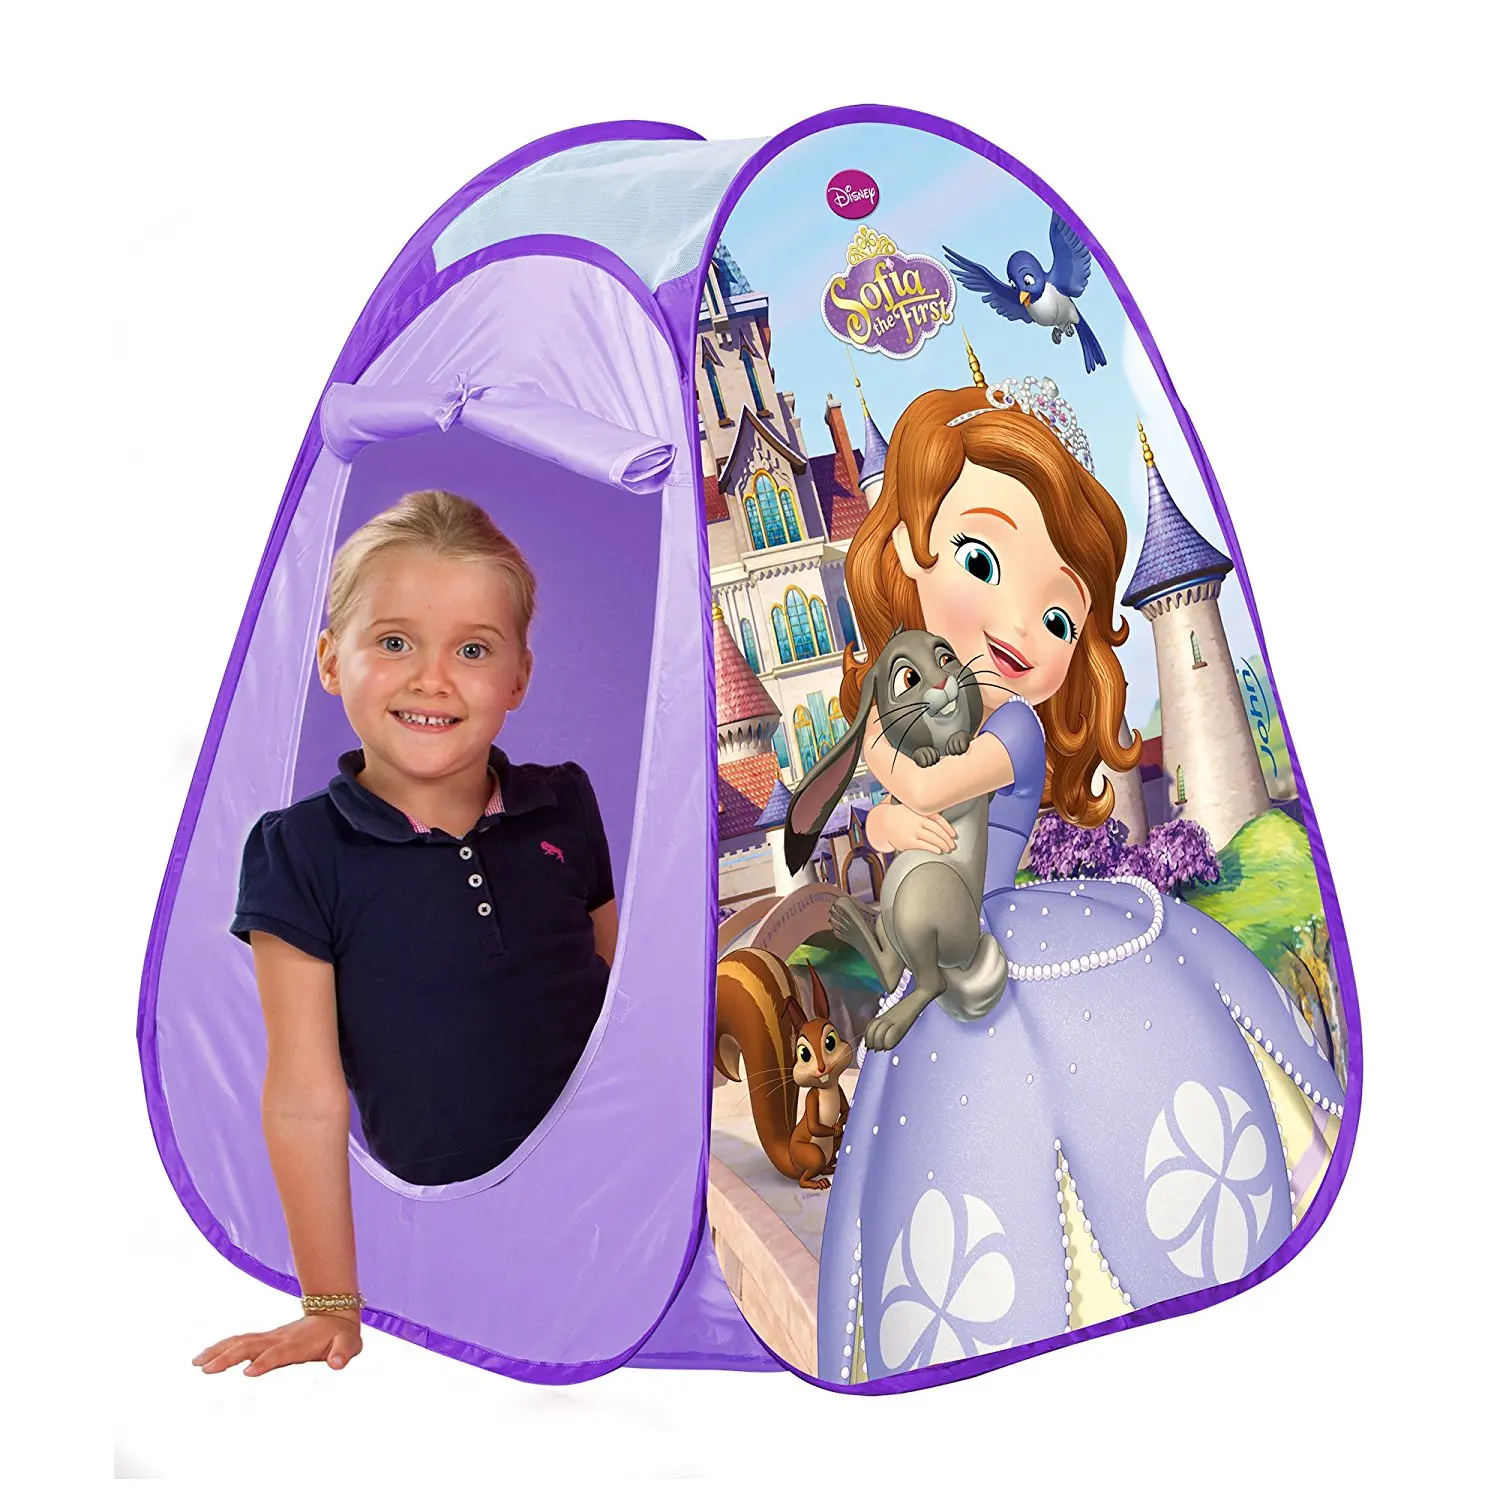 Playhut Disney Sofia the First  Pop up Play Tent Hideaway